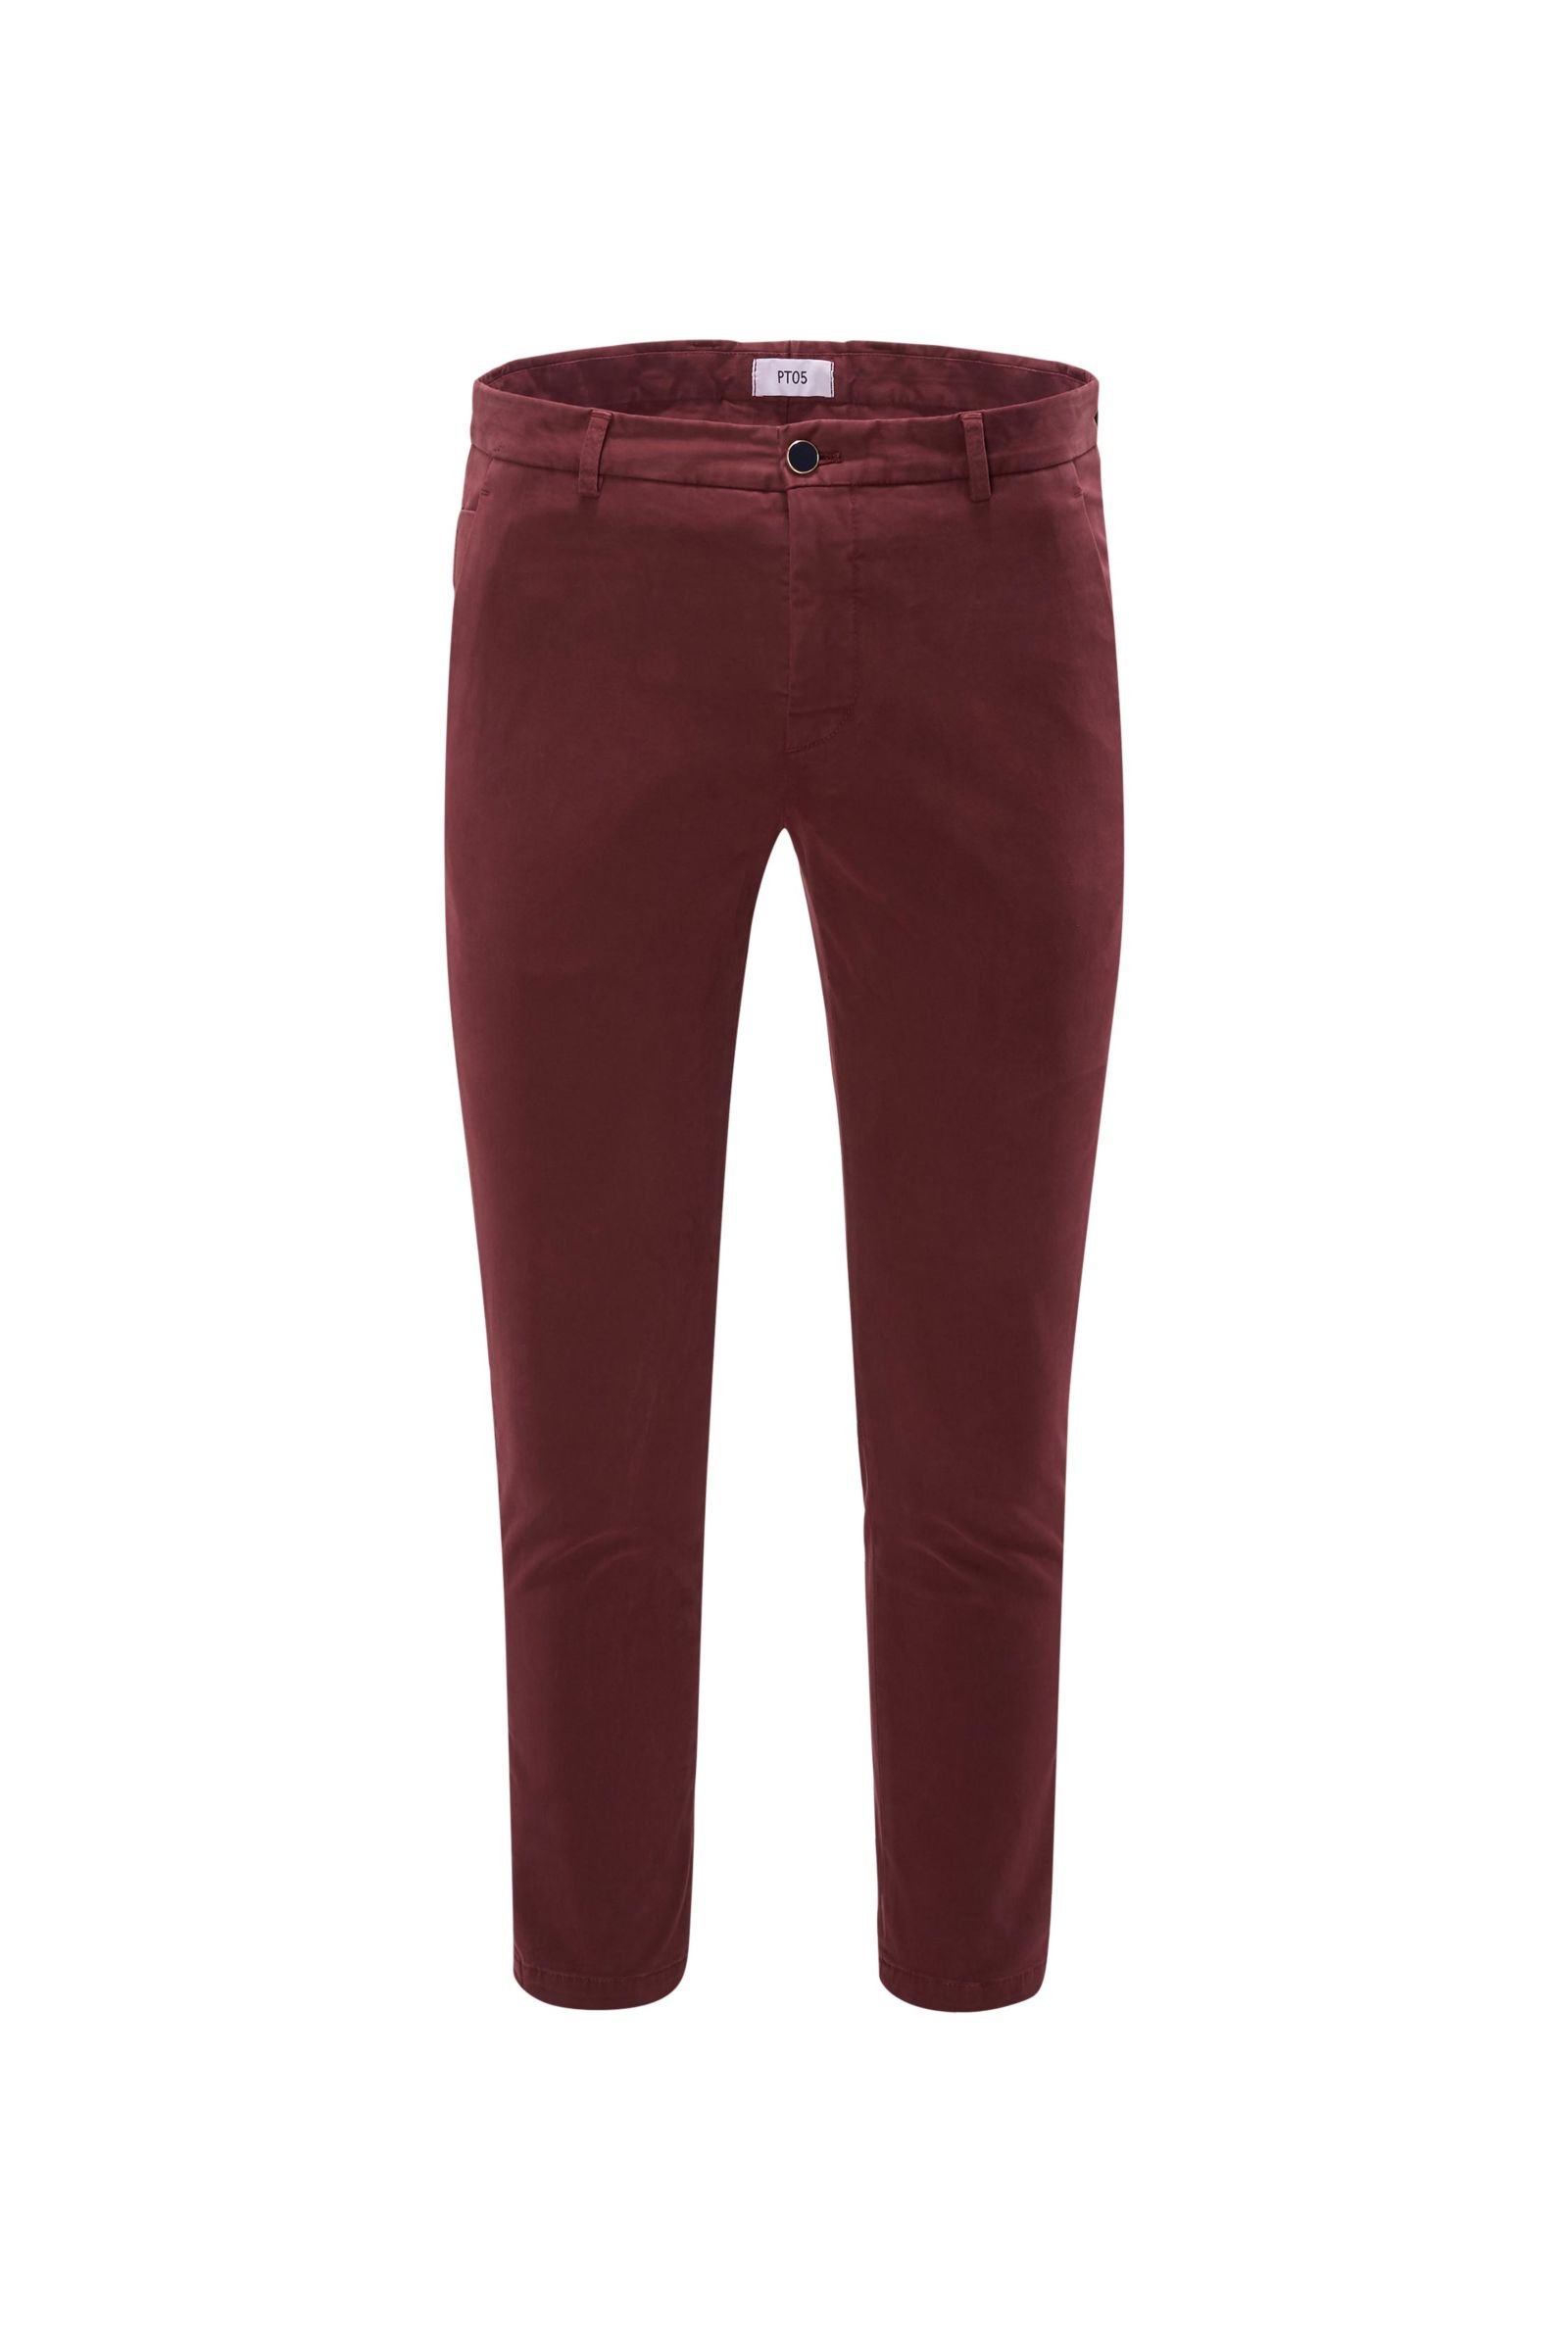 Cotton trousers 'Jungle Shaped Fit' burgundy